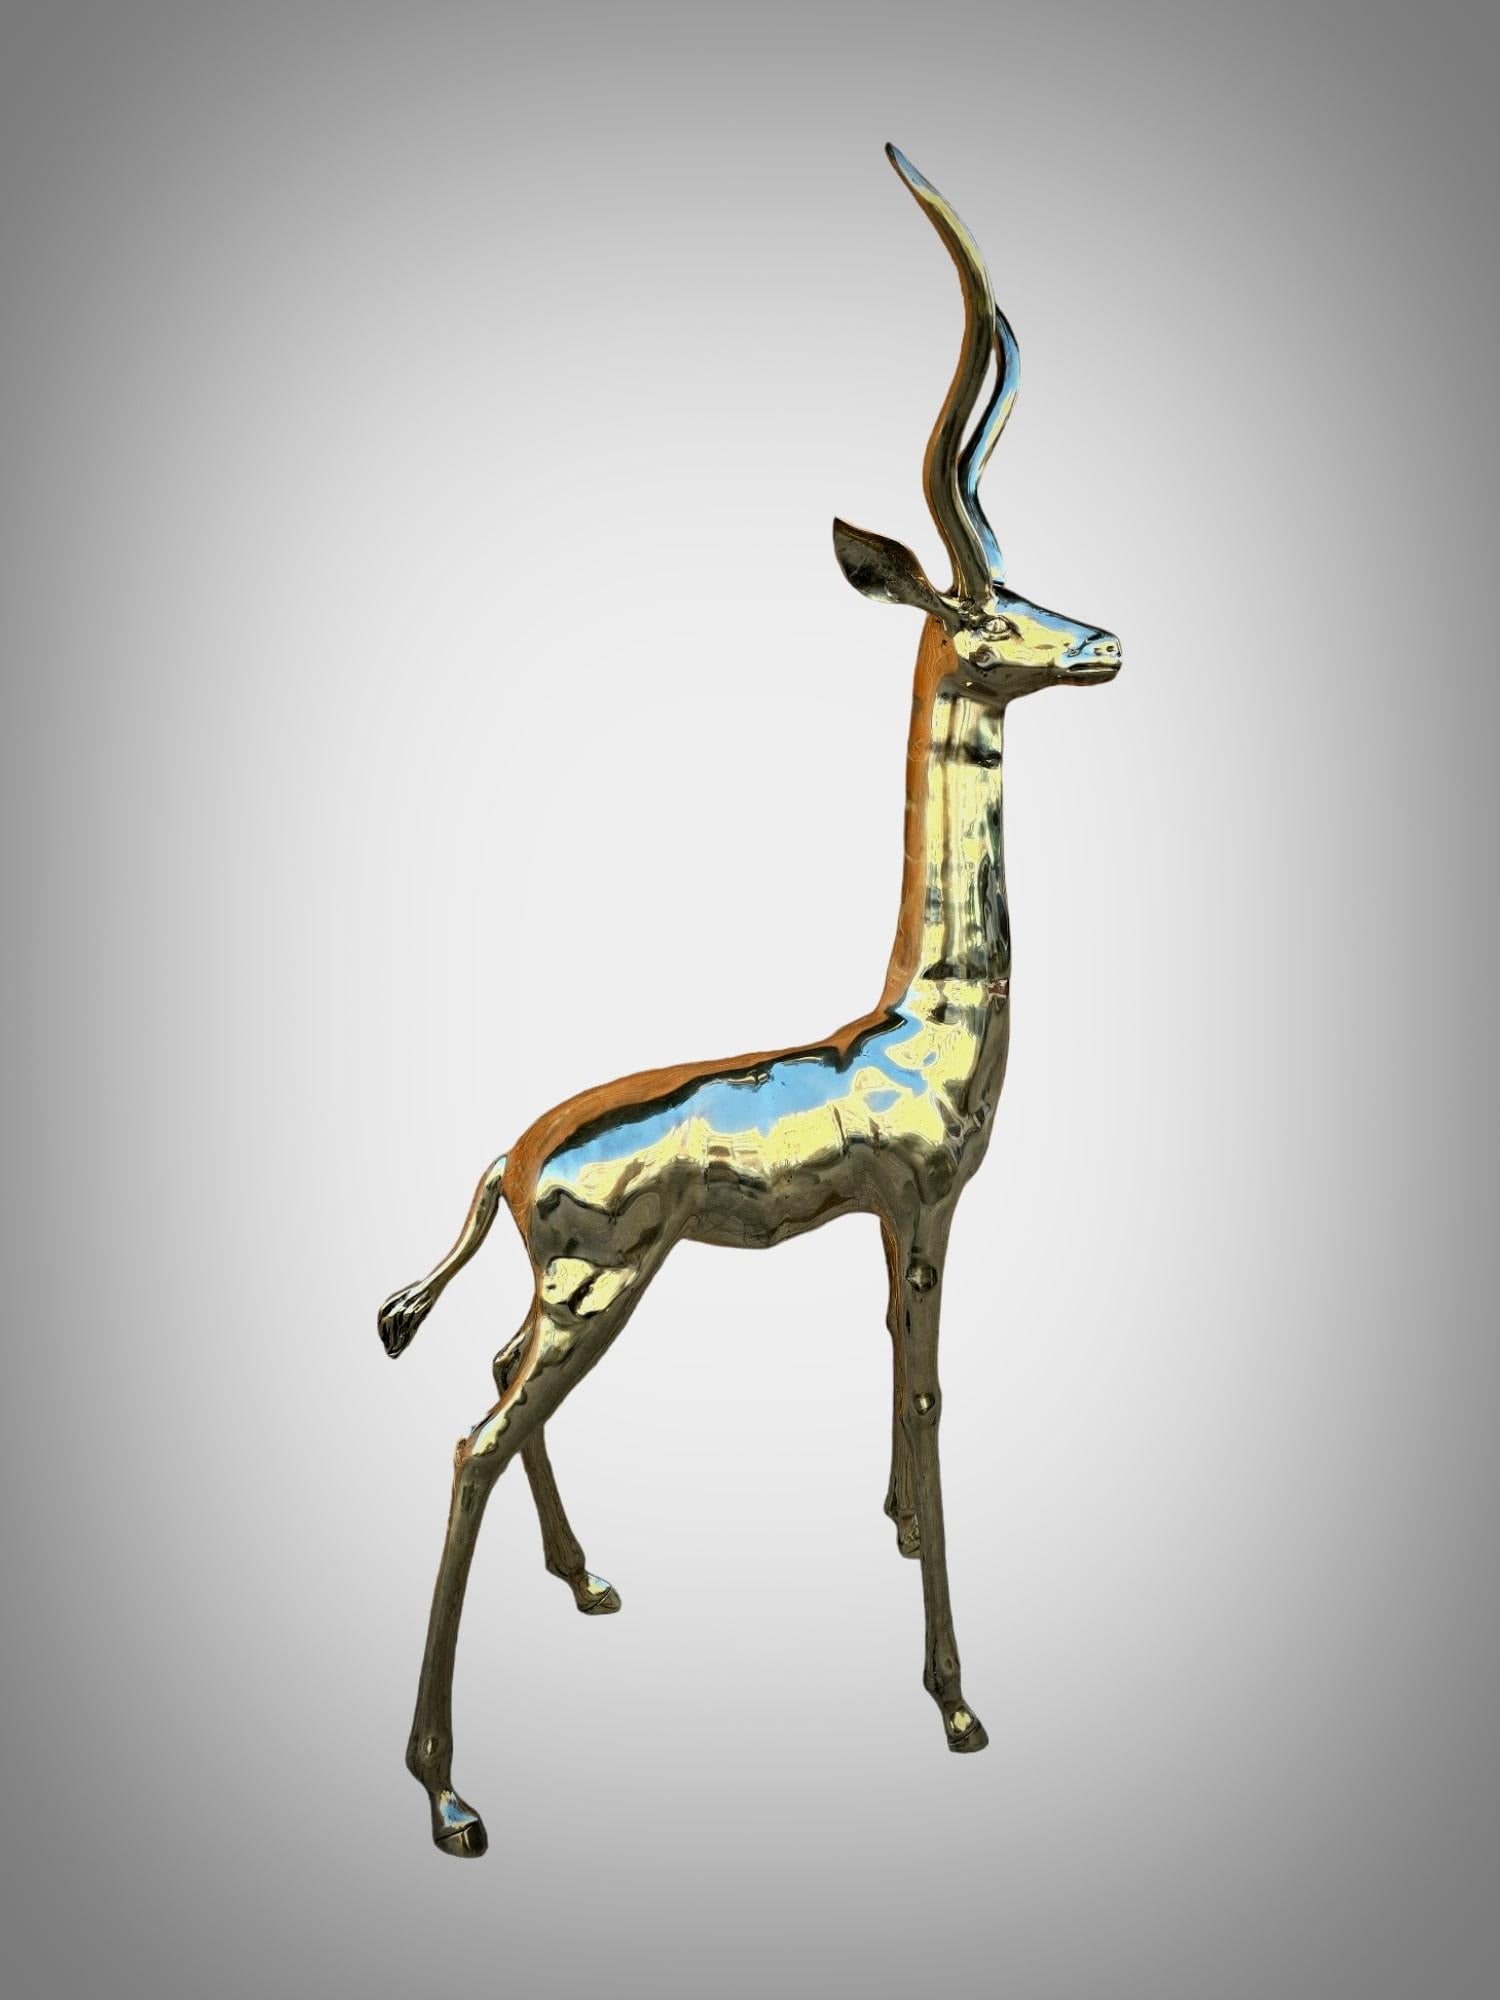 Exquisite Polished Bronze Sculpture: Lifesize Antelope from the 1950s For Sale 8